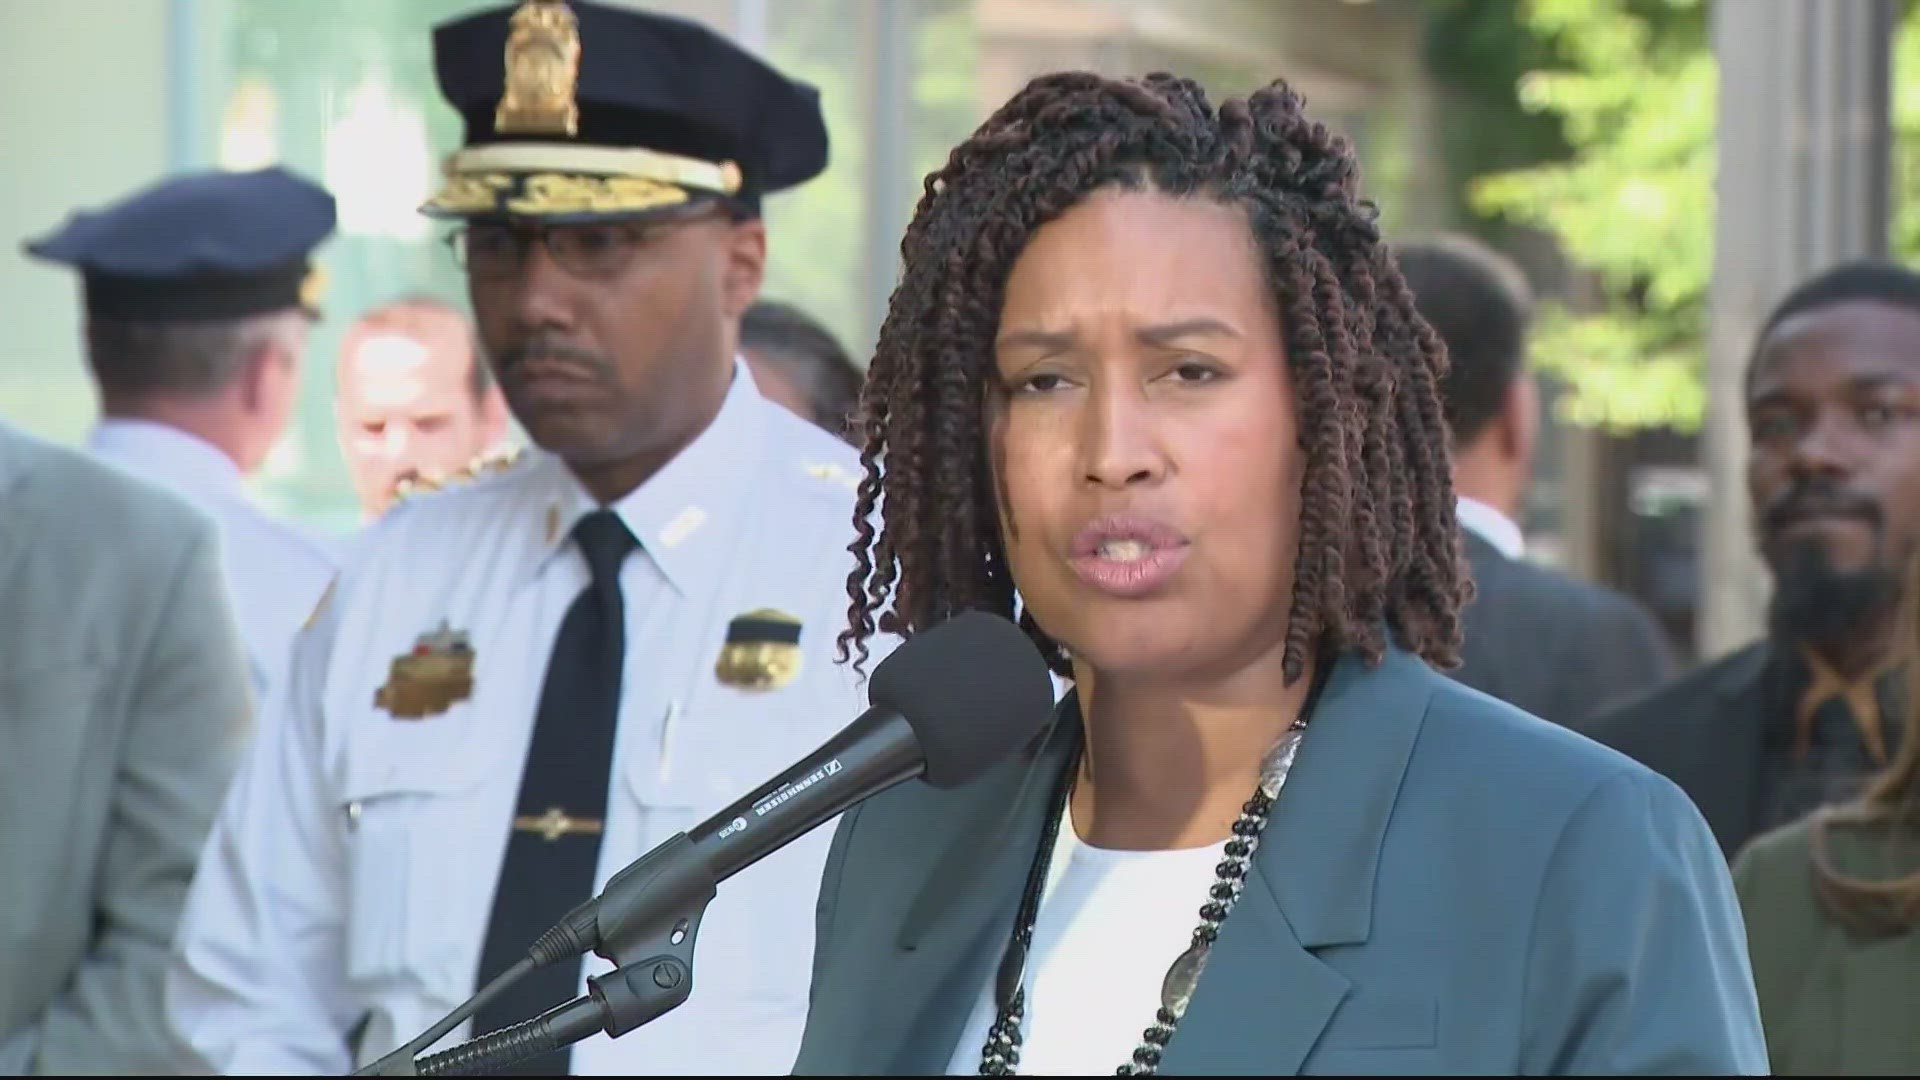 The new "Safer, Stronger DC" legislation comes a week after Bowser held a public safety summit to address rising crime rates.